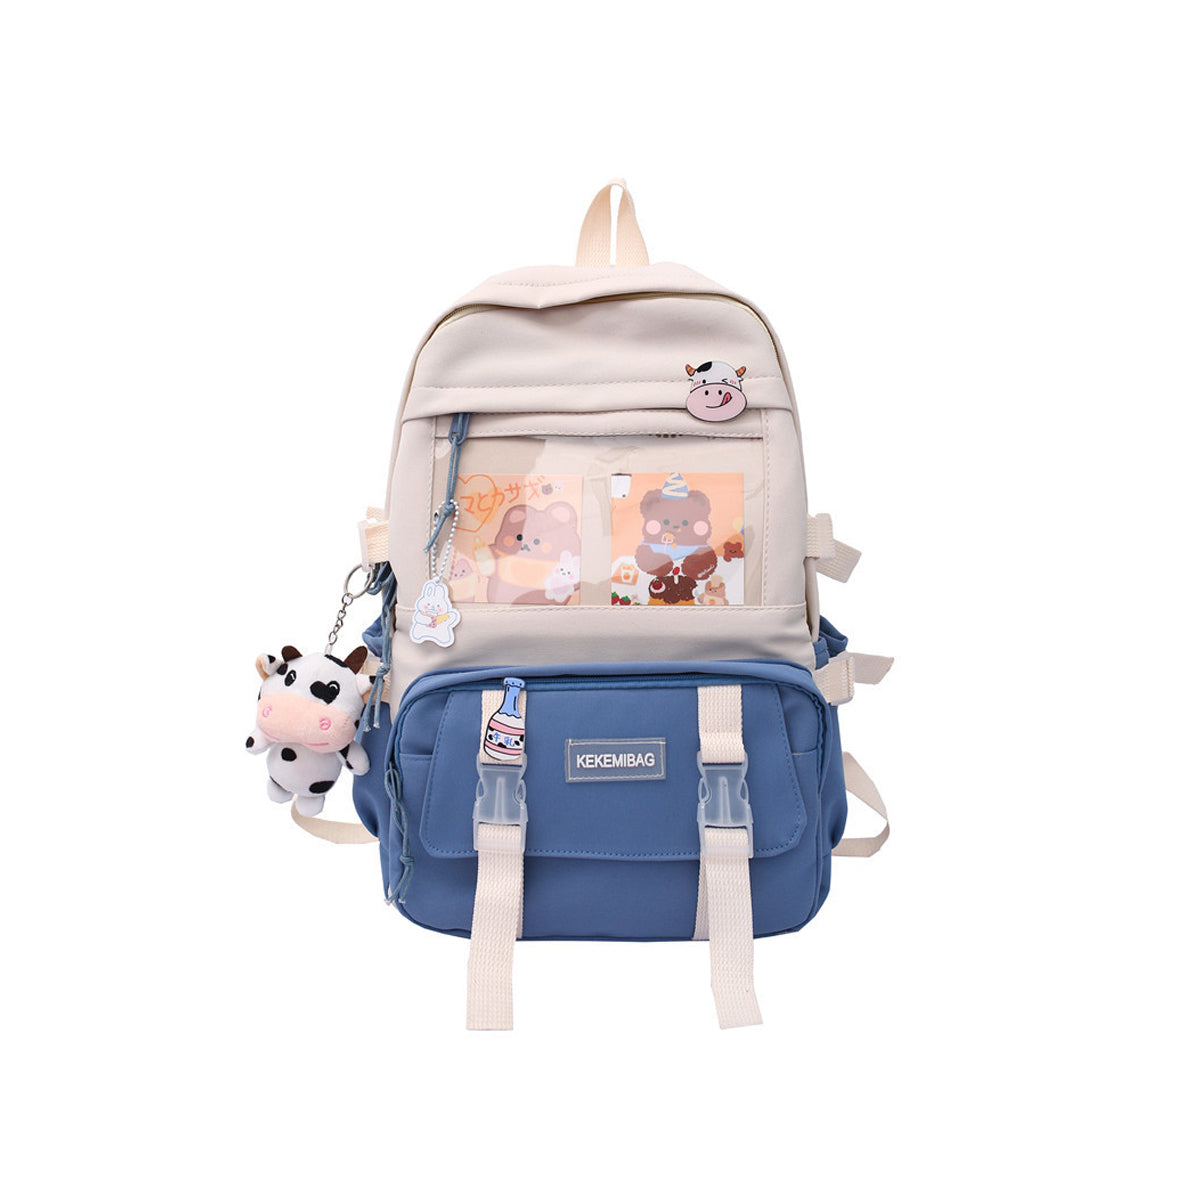 Lovely Pastel Rucksack With Kawaii Pin And Cute Accessories